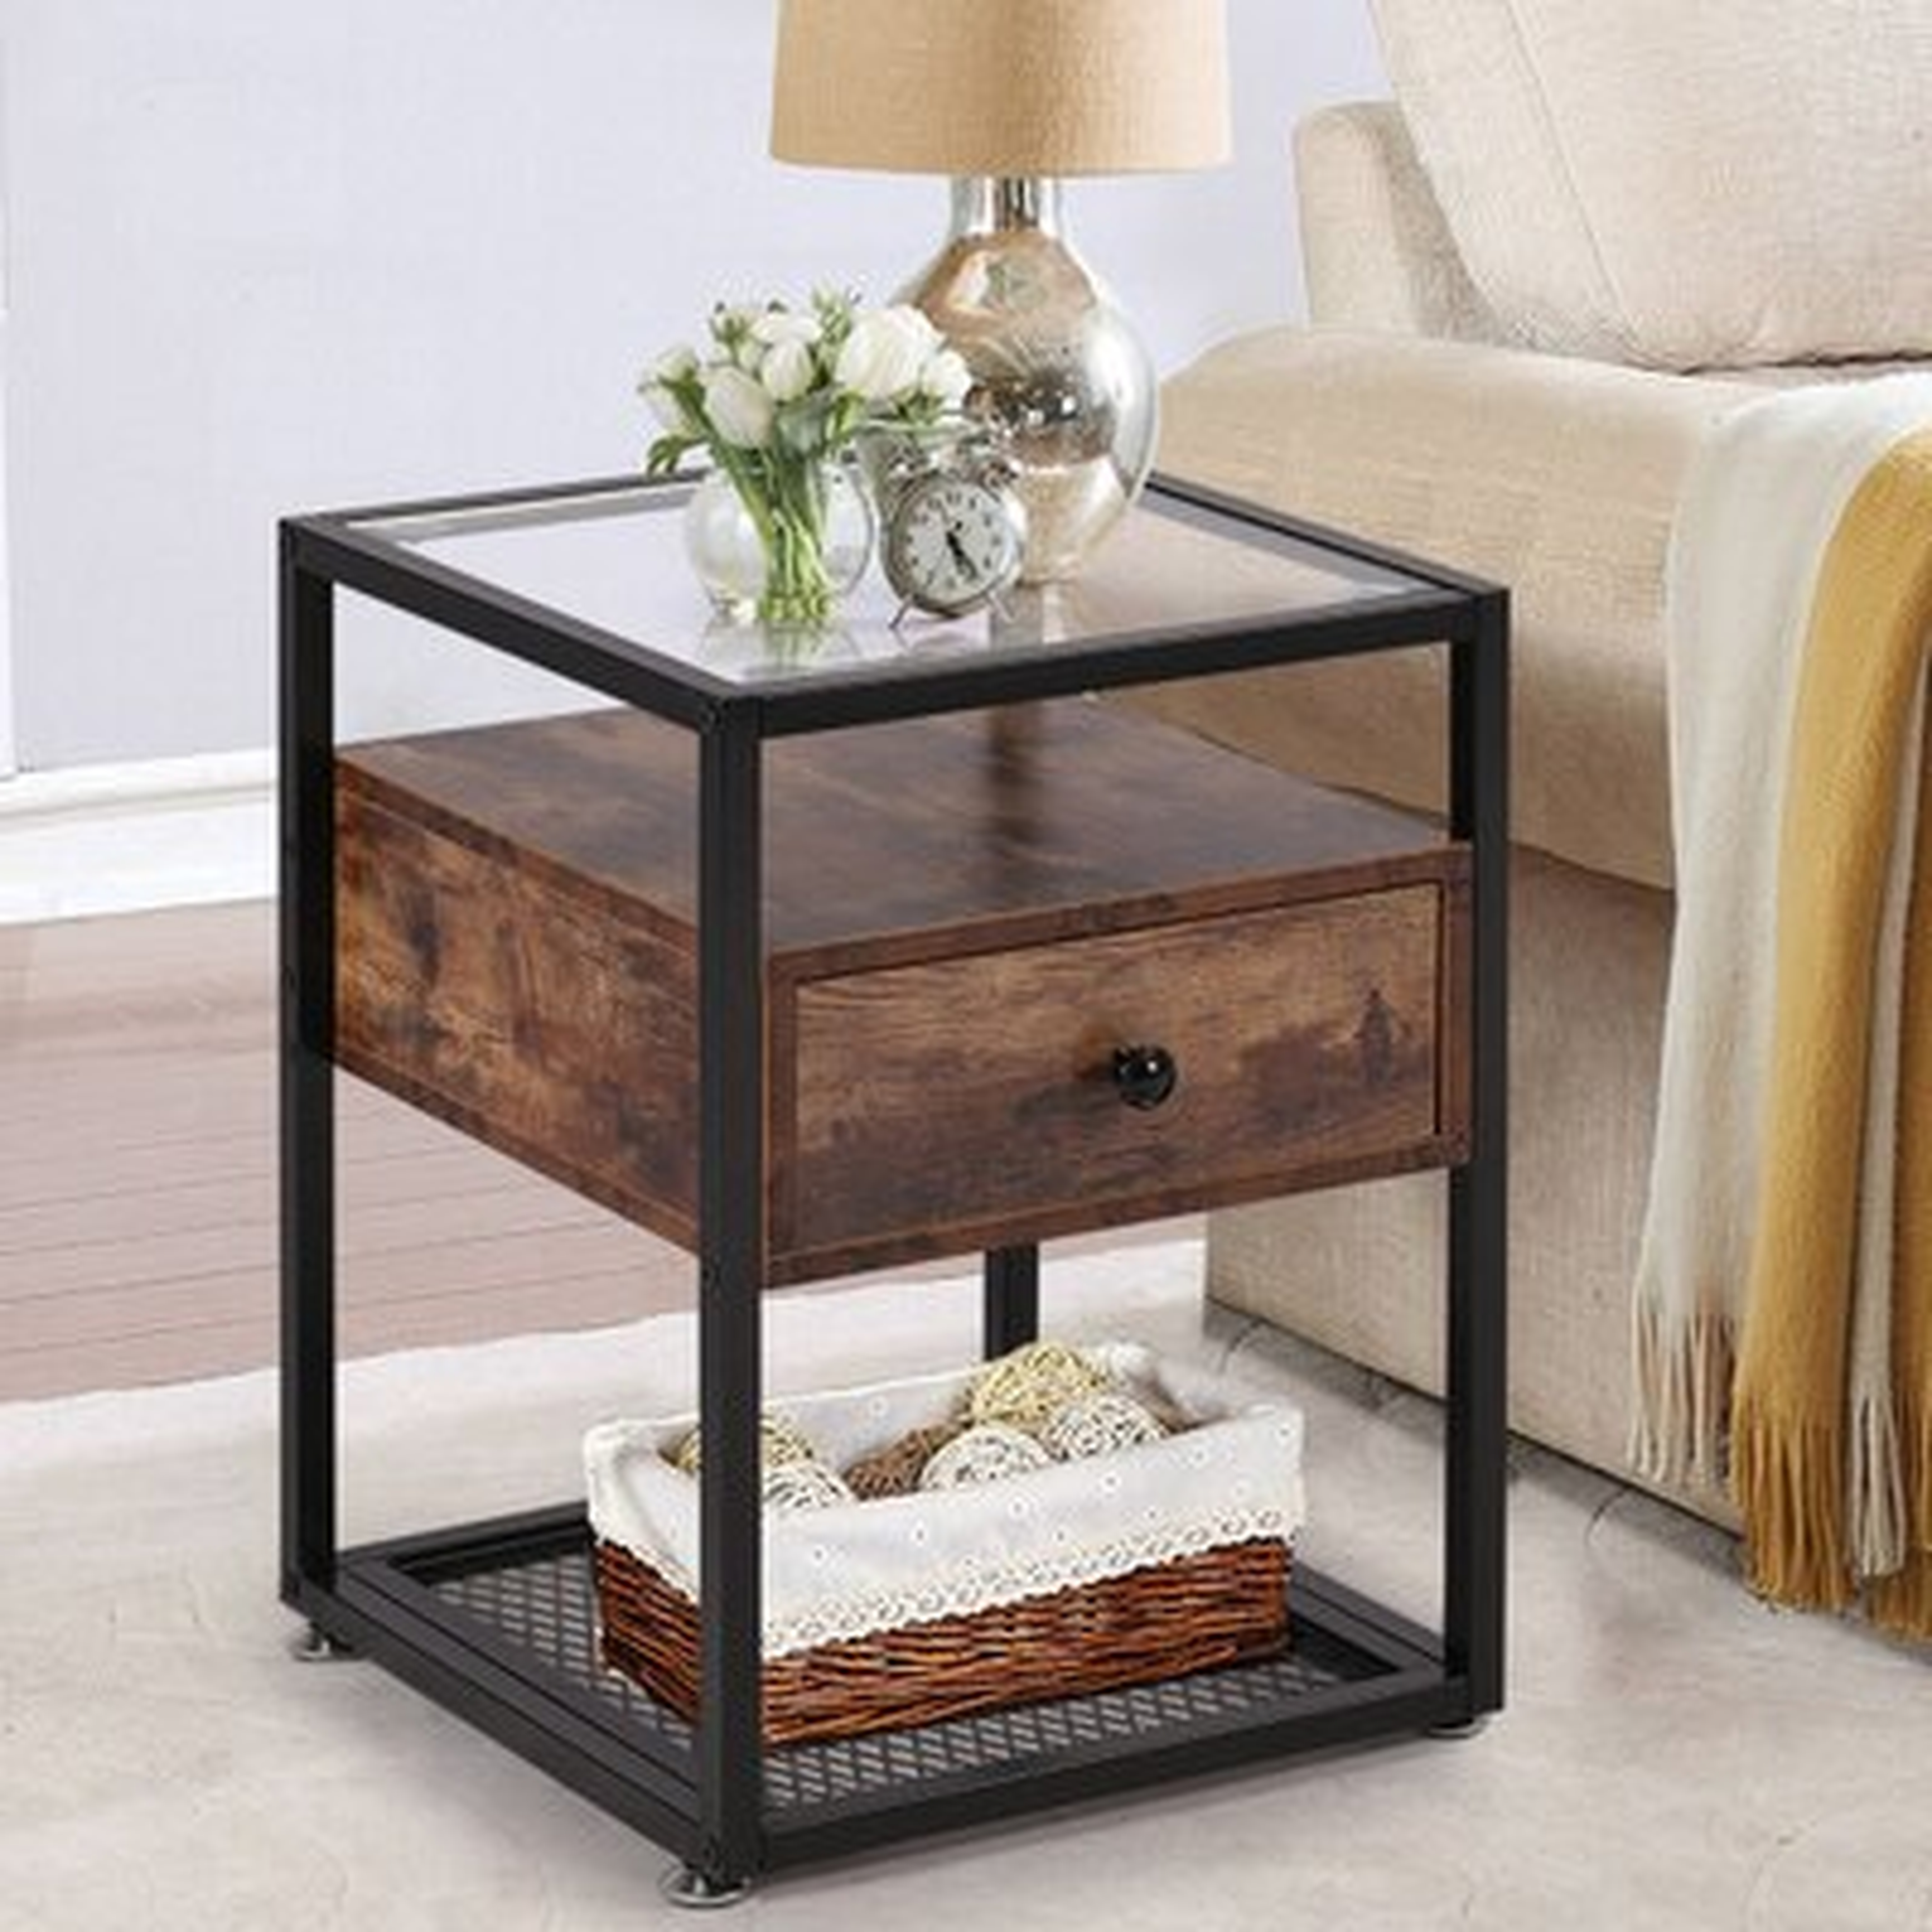 Quarles Glass Top End Table with Storage - Wayfair